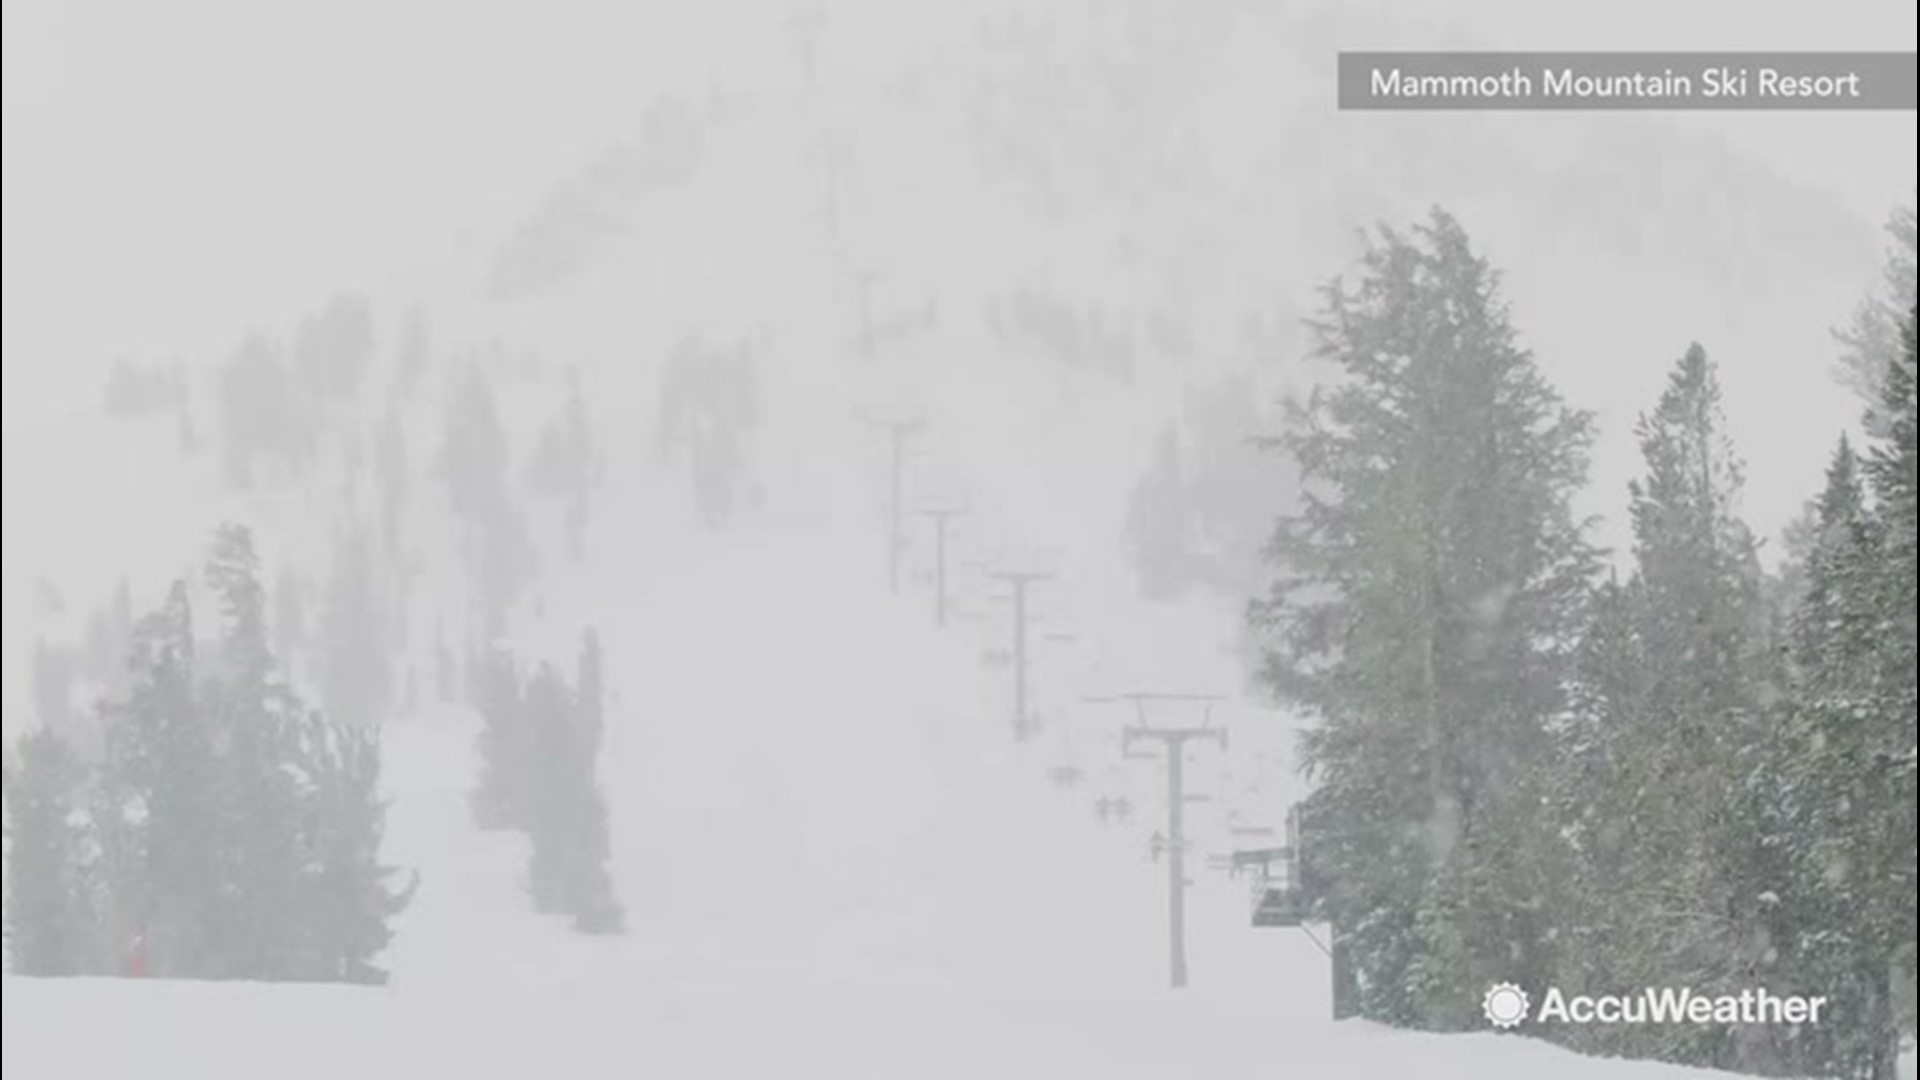 Its one thing if this was February, but the fact that its late May is even crazier. With 12-18' of fresh snow on the hill, the ski resort Mammoth Mountain announced today it will stay open daily until August.